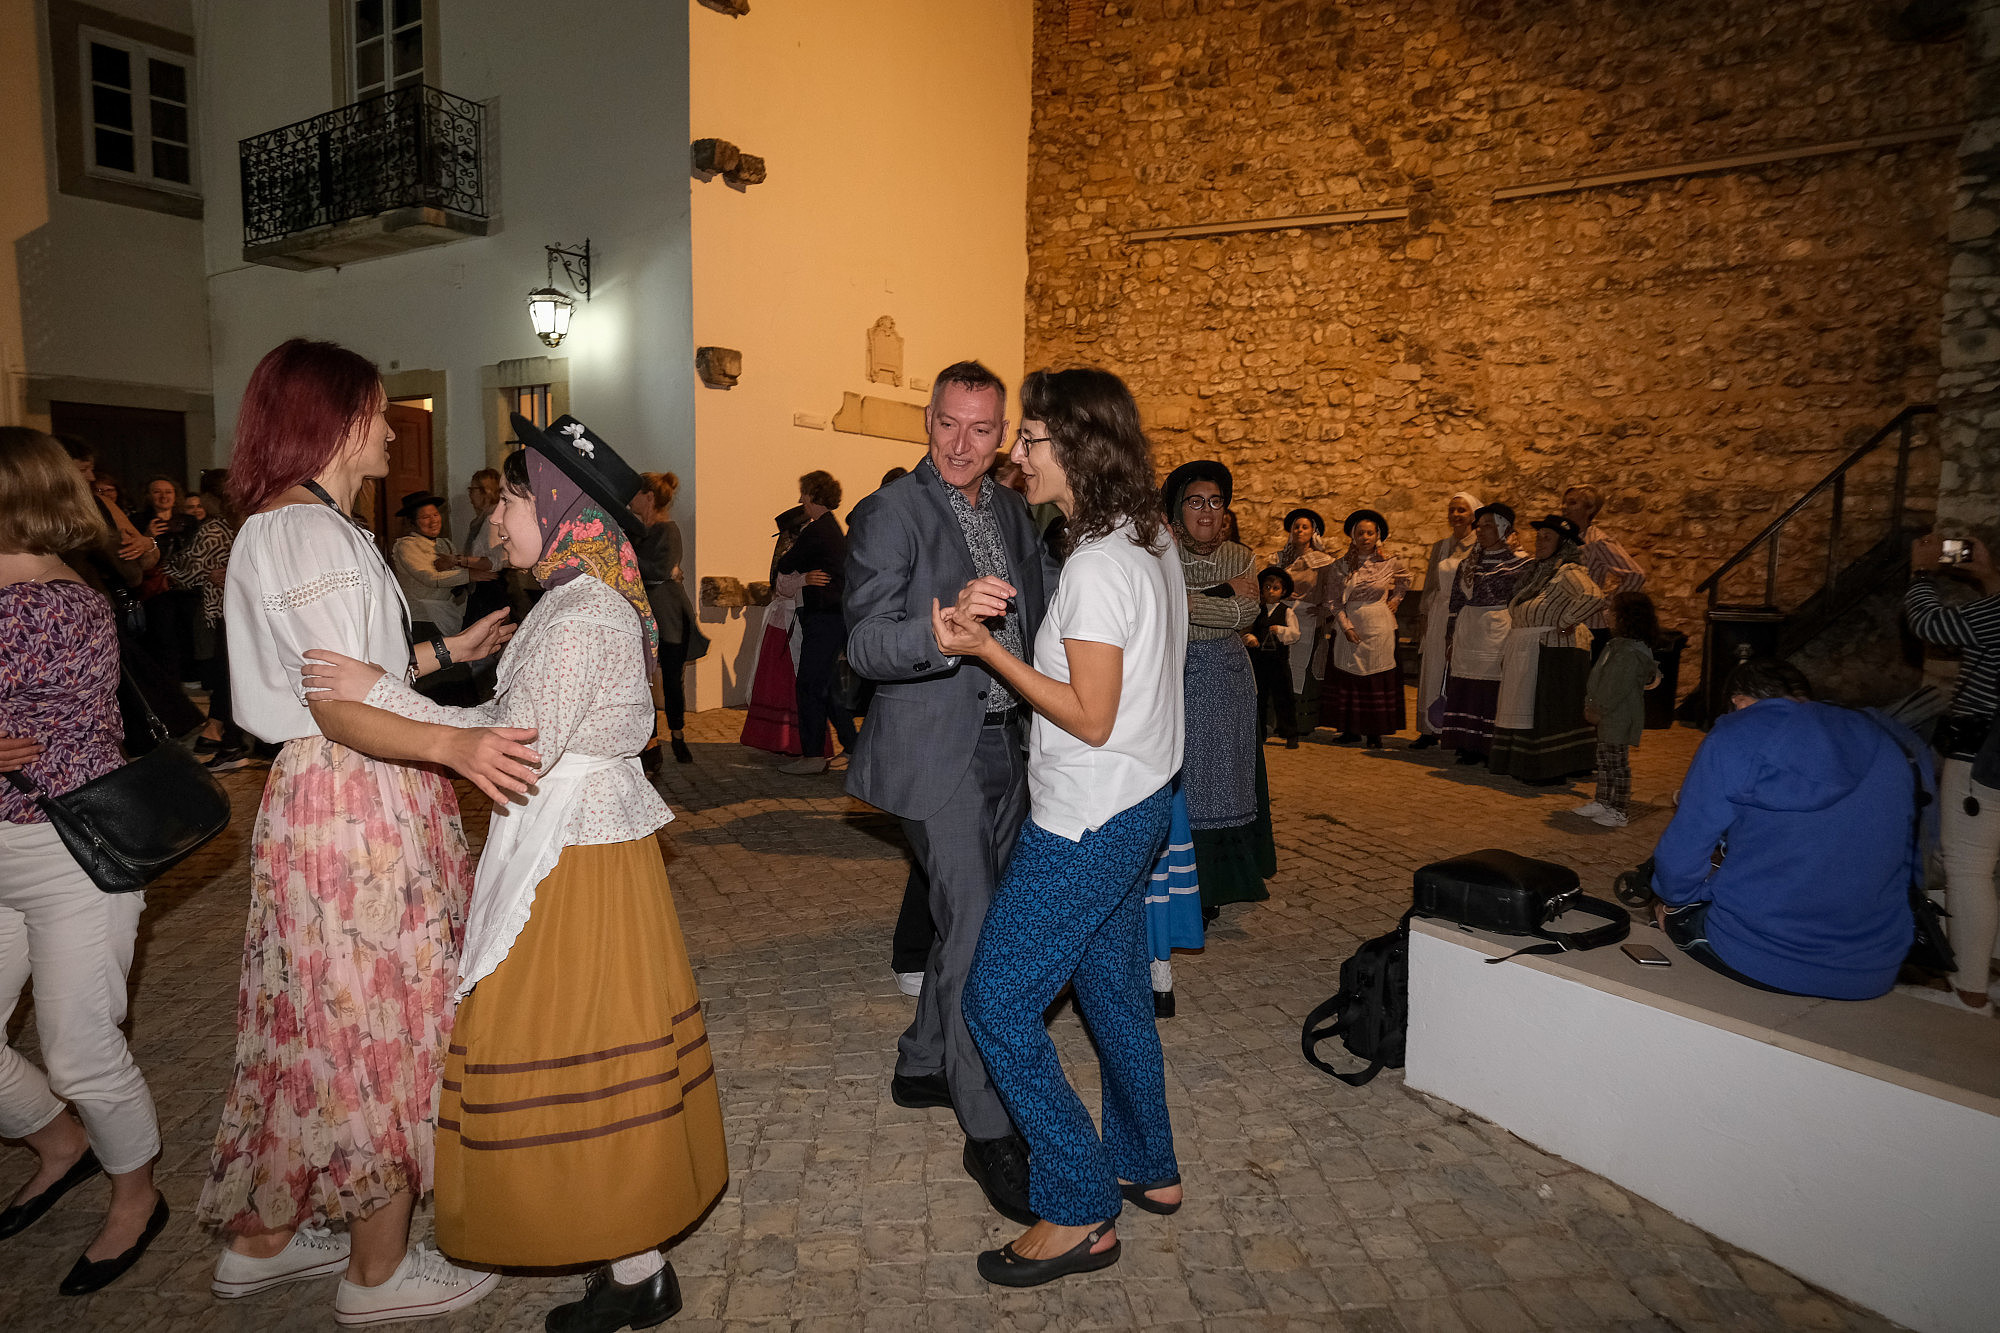 People are dancing in pairs outside in the evening. In the background is an ancient looking wall.  © Image: Jorge Gomes